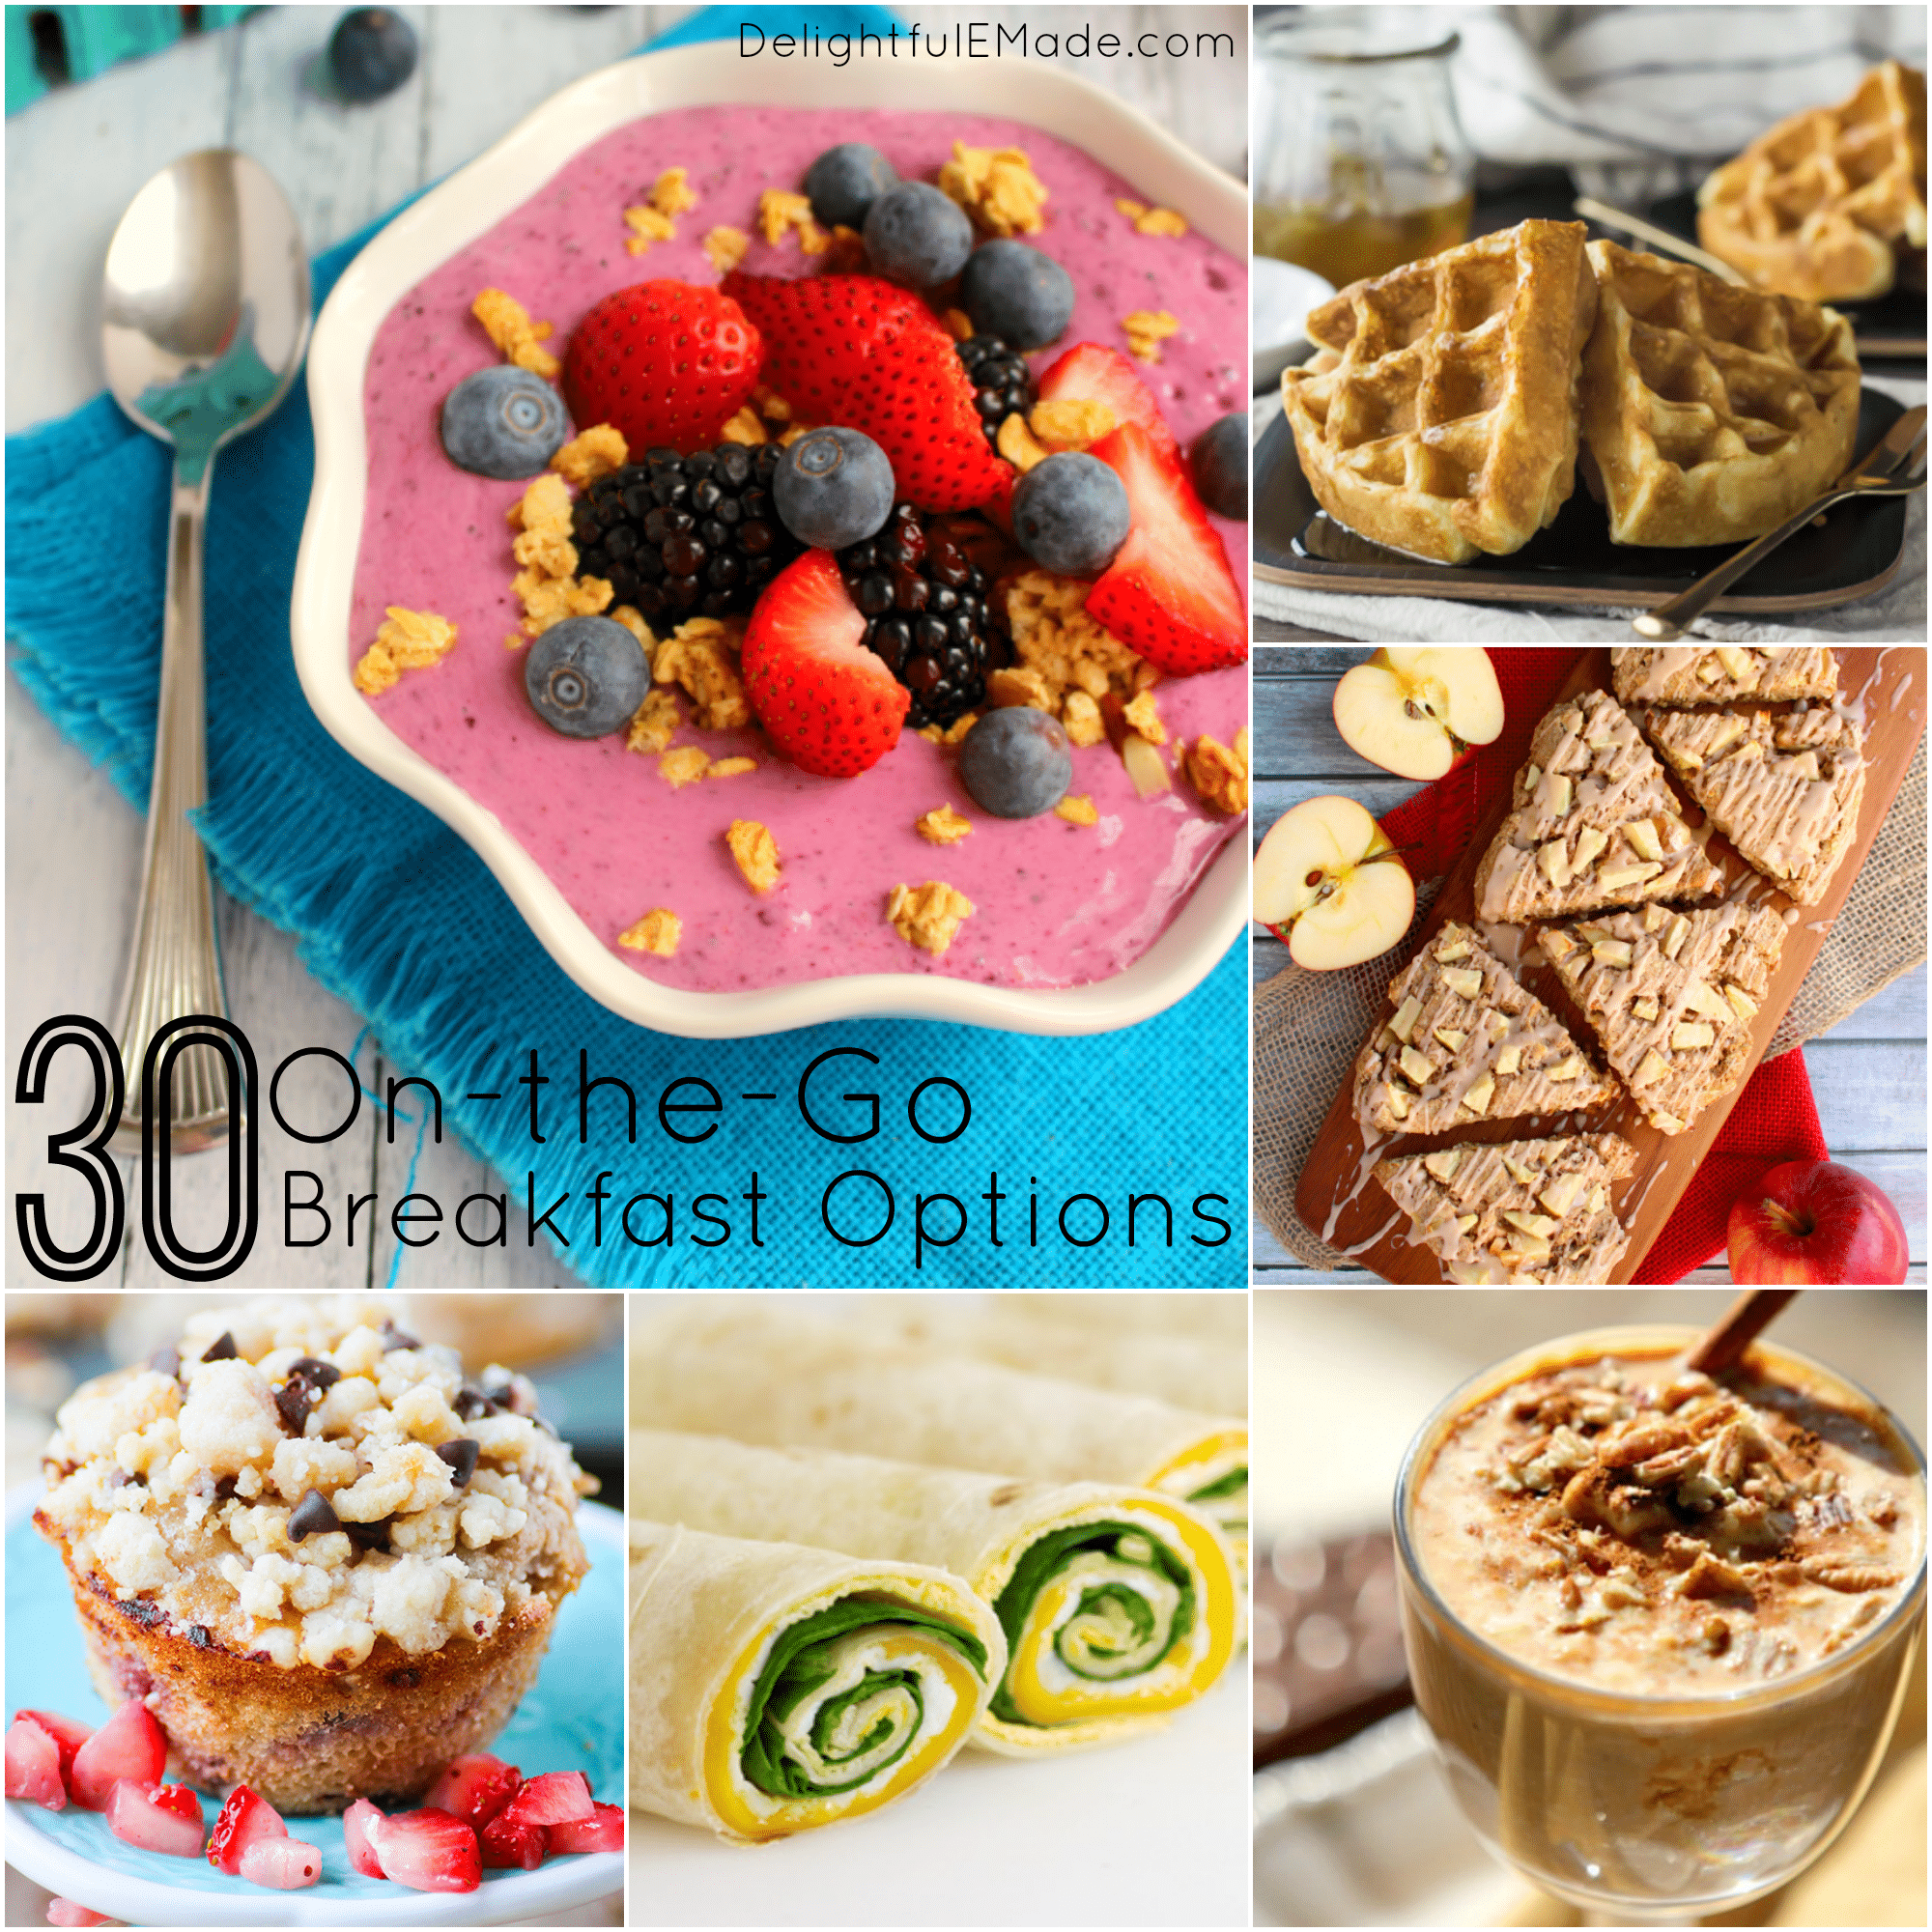 Are mornings busy and rushed at your house? I've put together 30 quick, easy and delicious breakfast options that are perfect for hectic, rushed mornings when you need to get out the door!